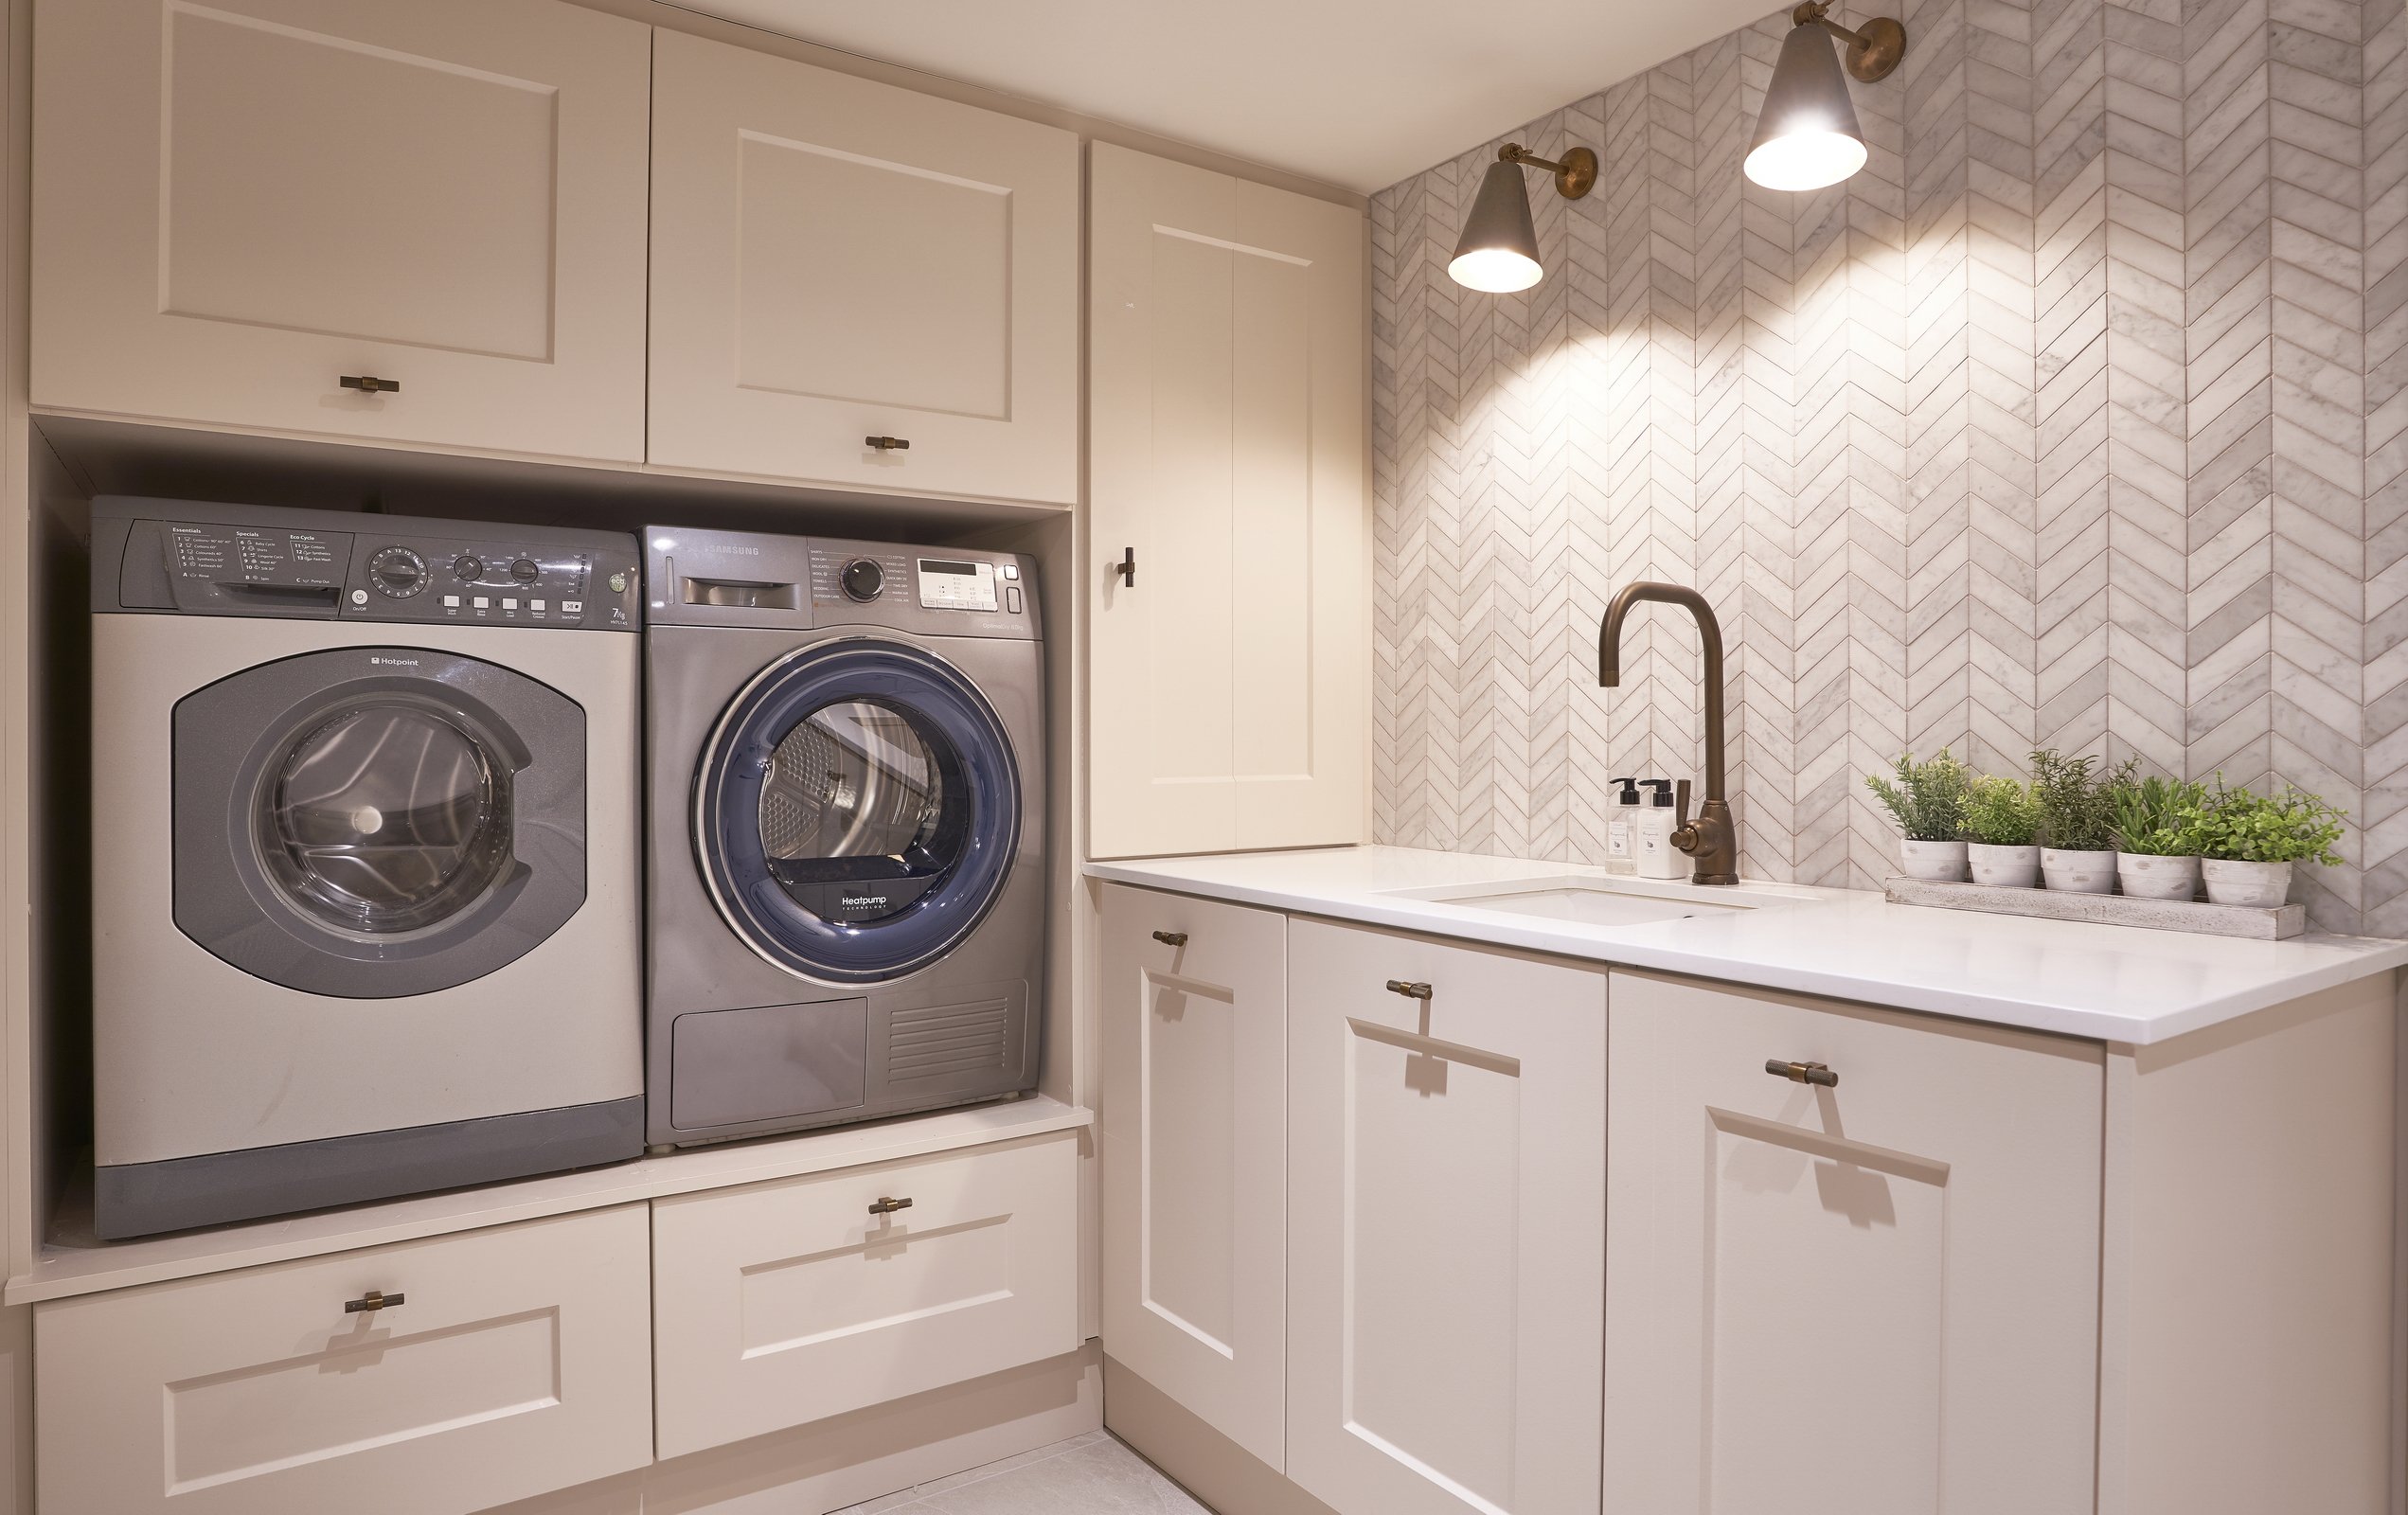 Laundry room with extra storage